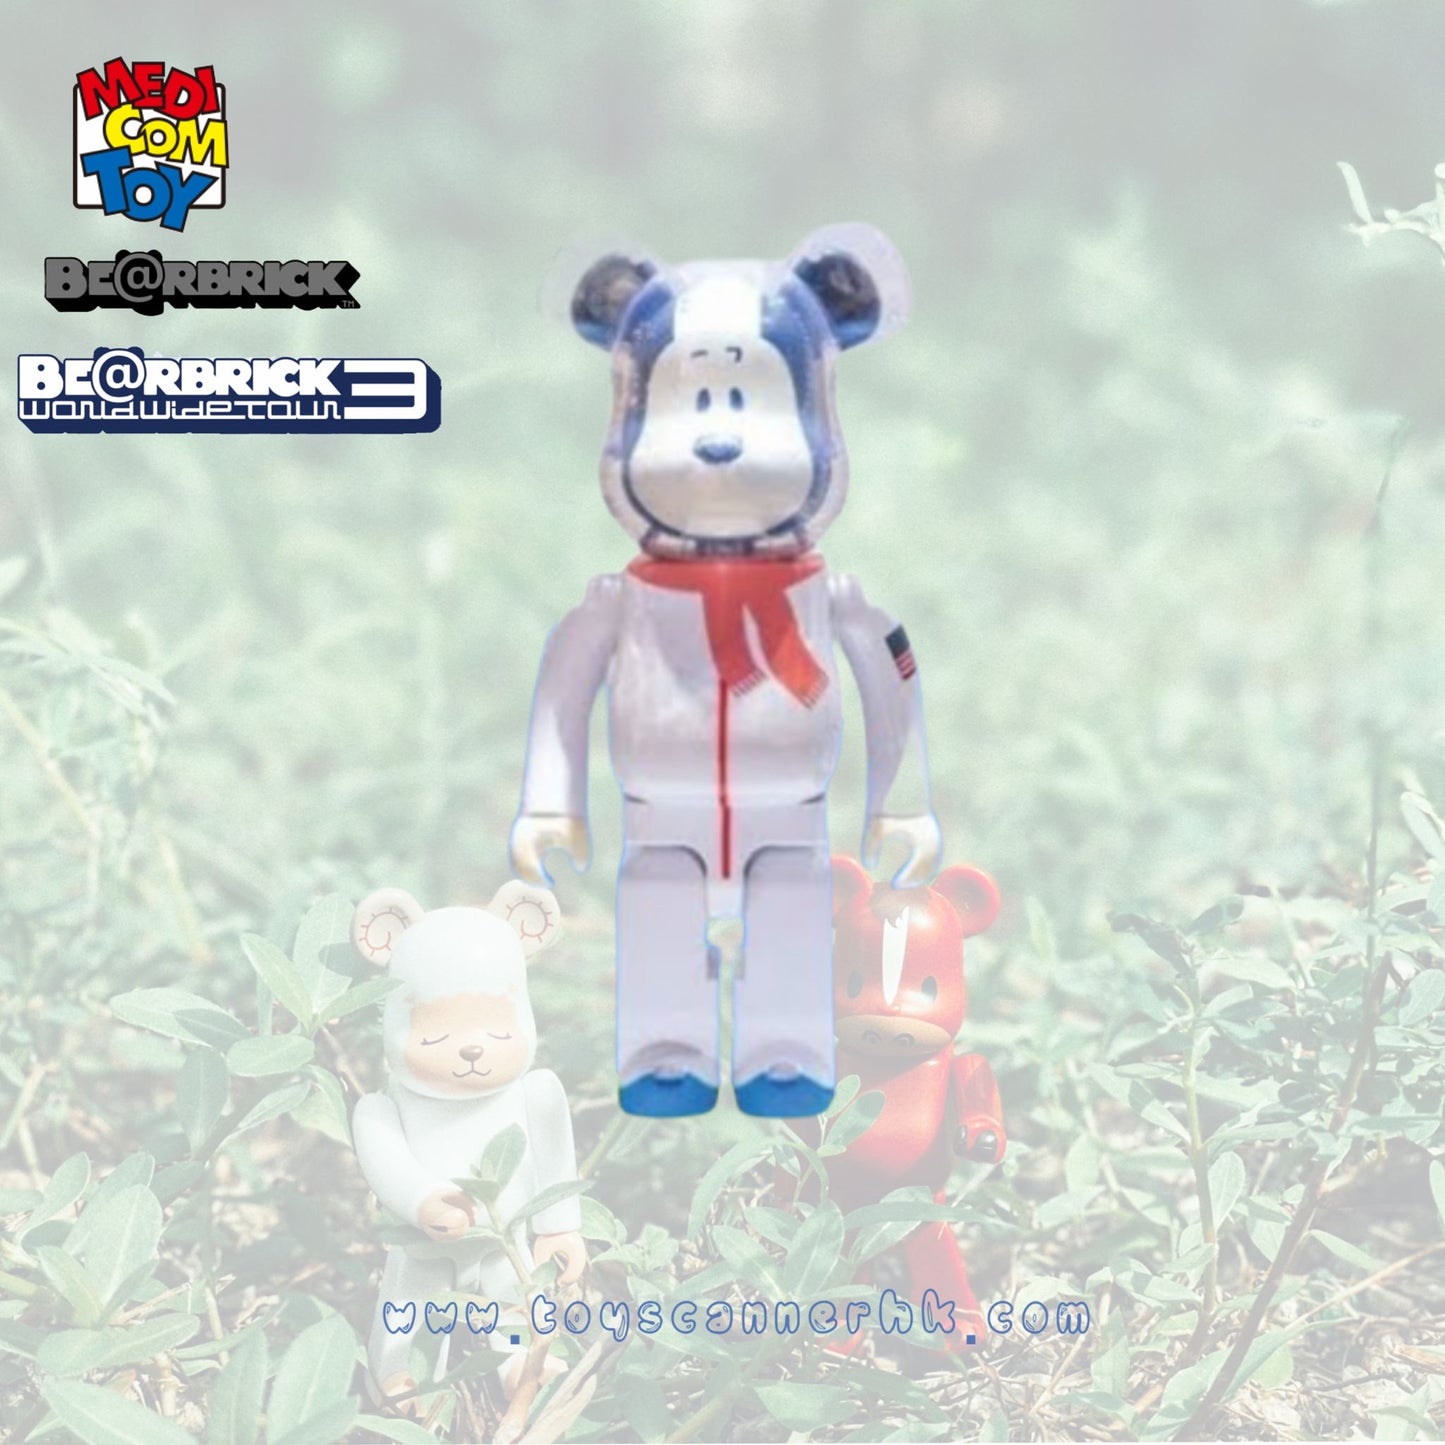 (Pre-order) BE@RBRICK ASTRONAUT SNOOPY 400%